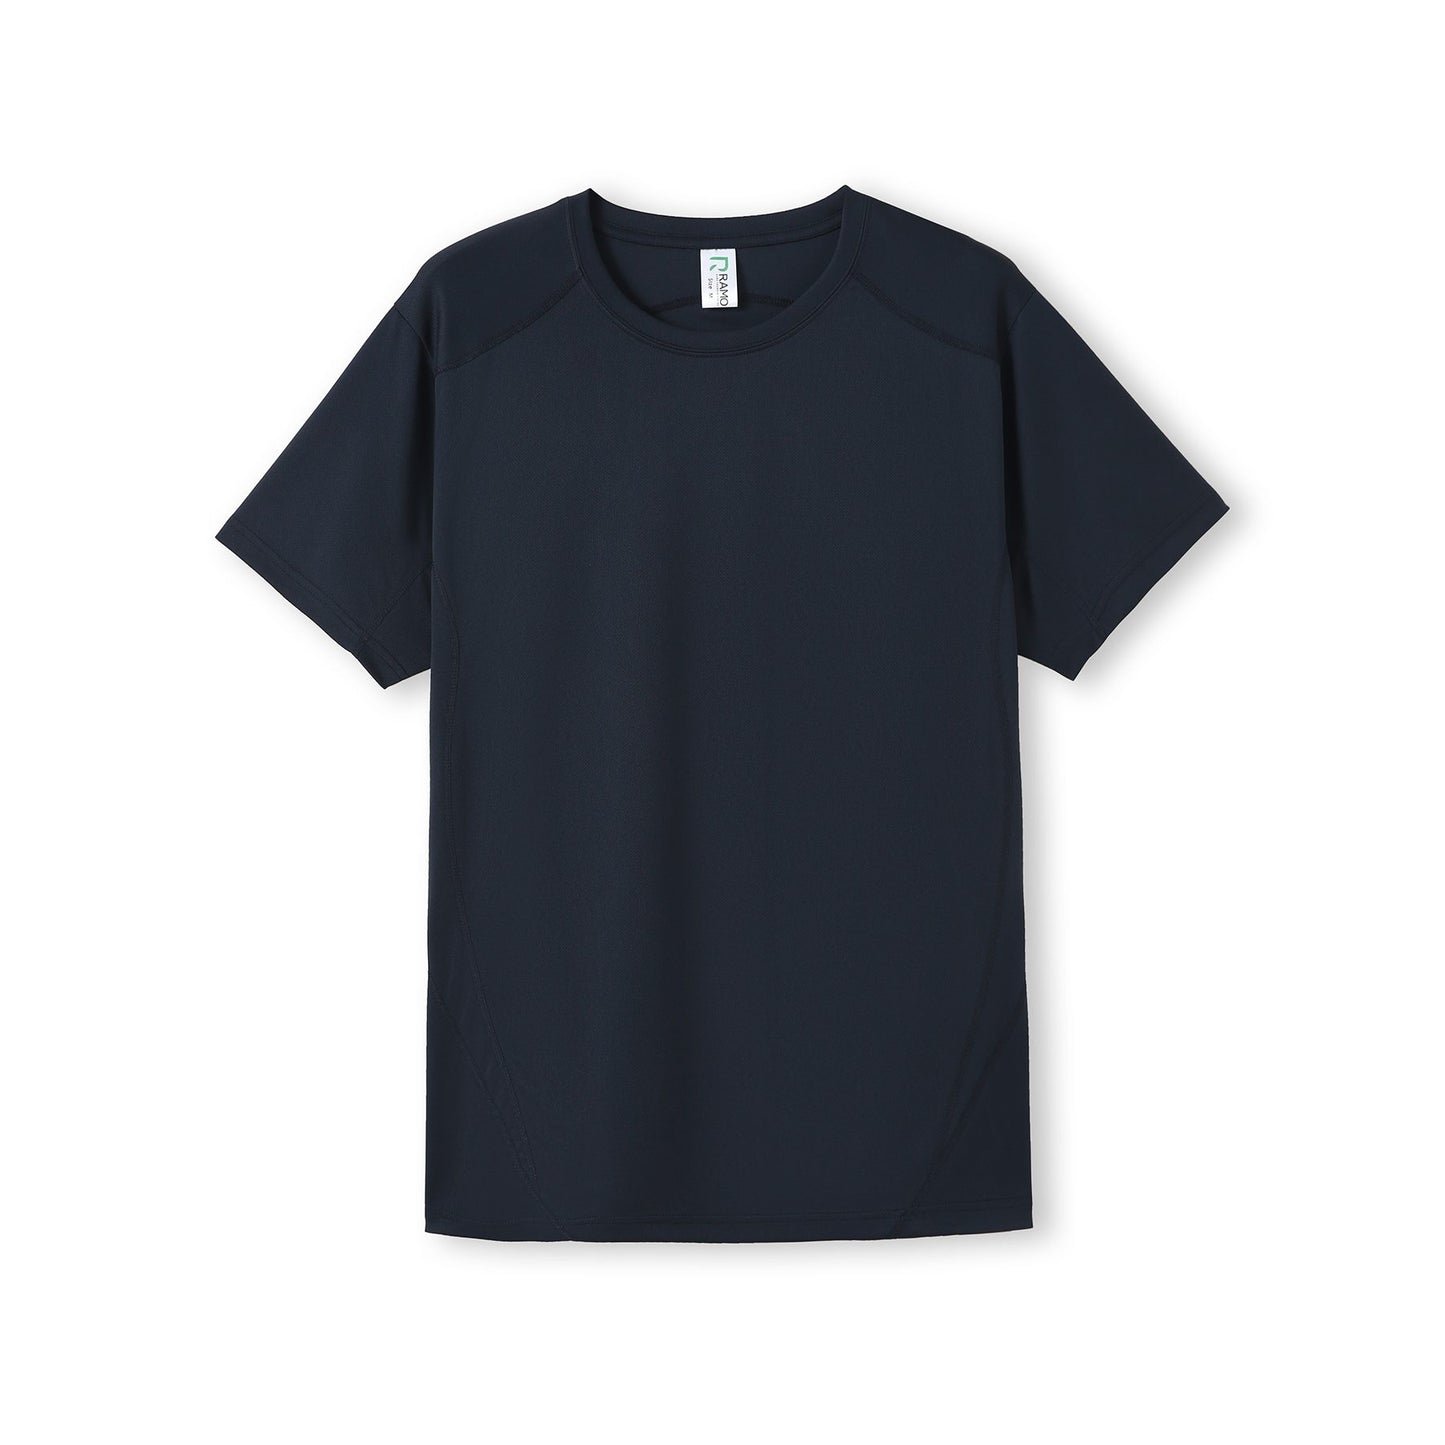 Ramo Mens Accelerator Cool Dry T-shirt (T447MS)2nd Color